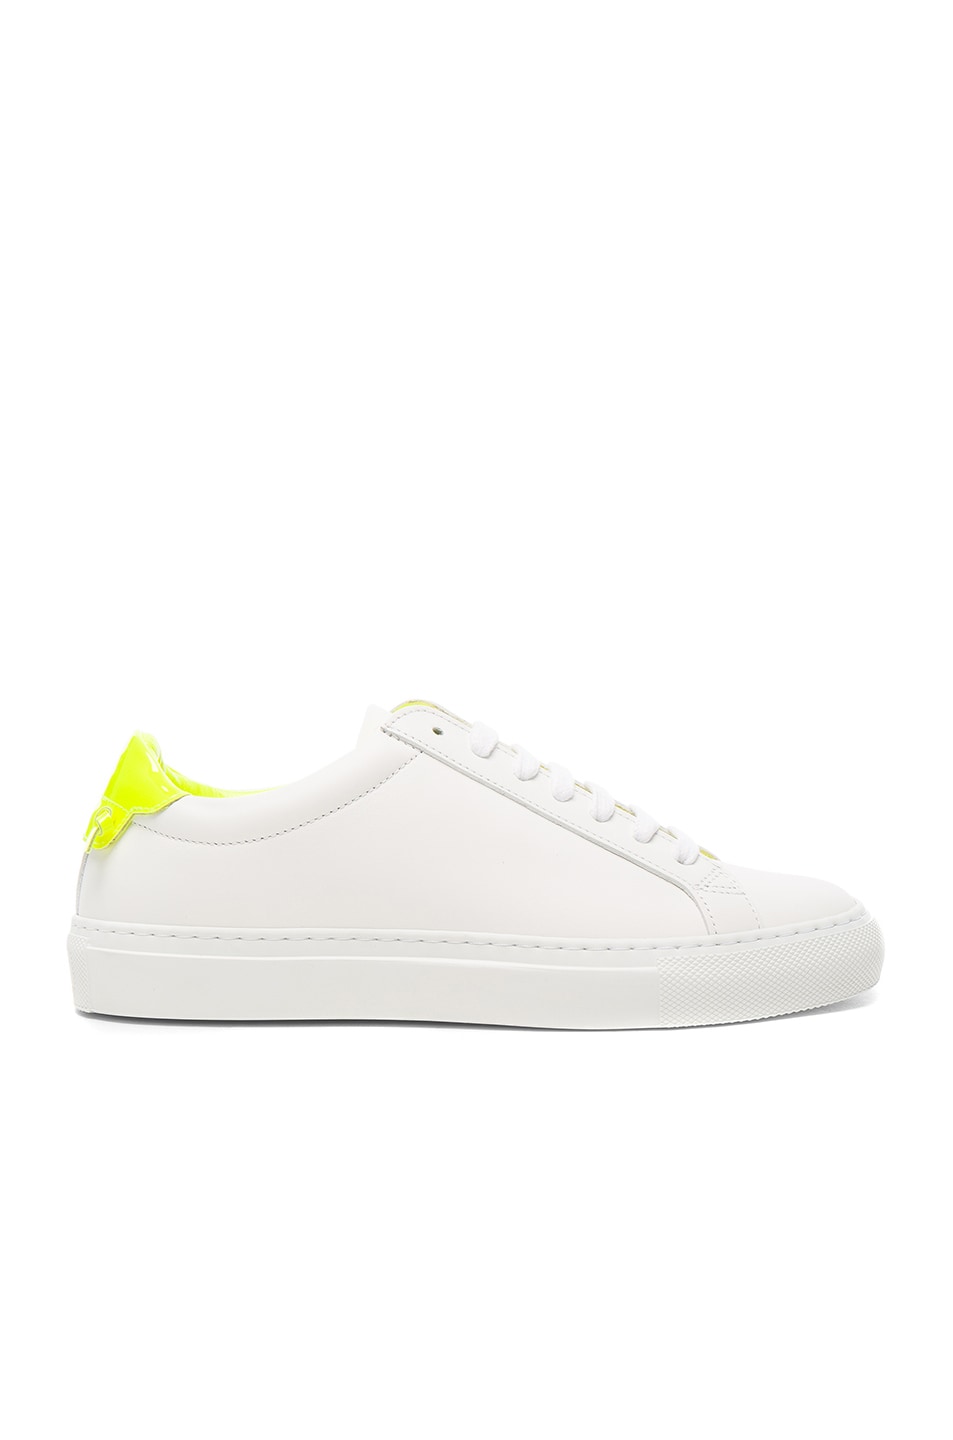 Image 1 of Givenchy Leather Urban Street Low Sneakers in White & Yellow